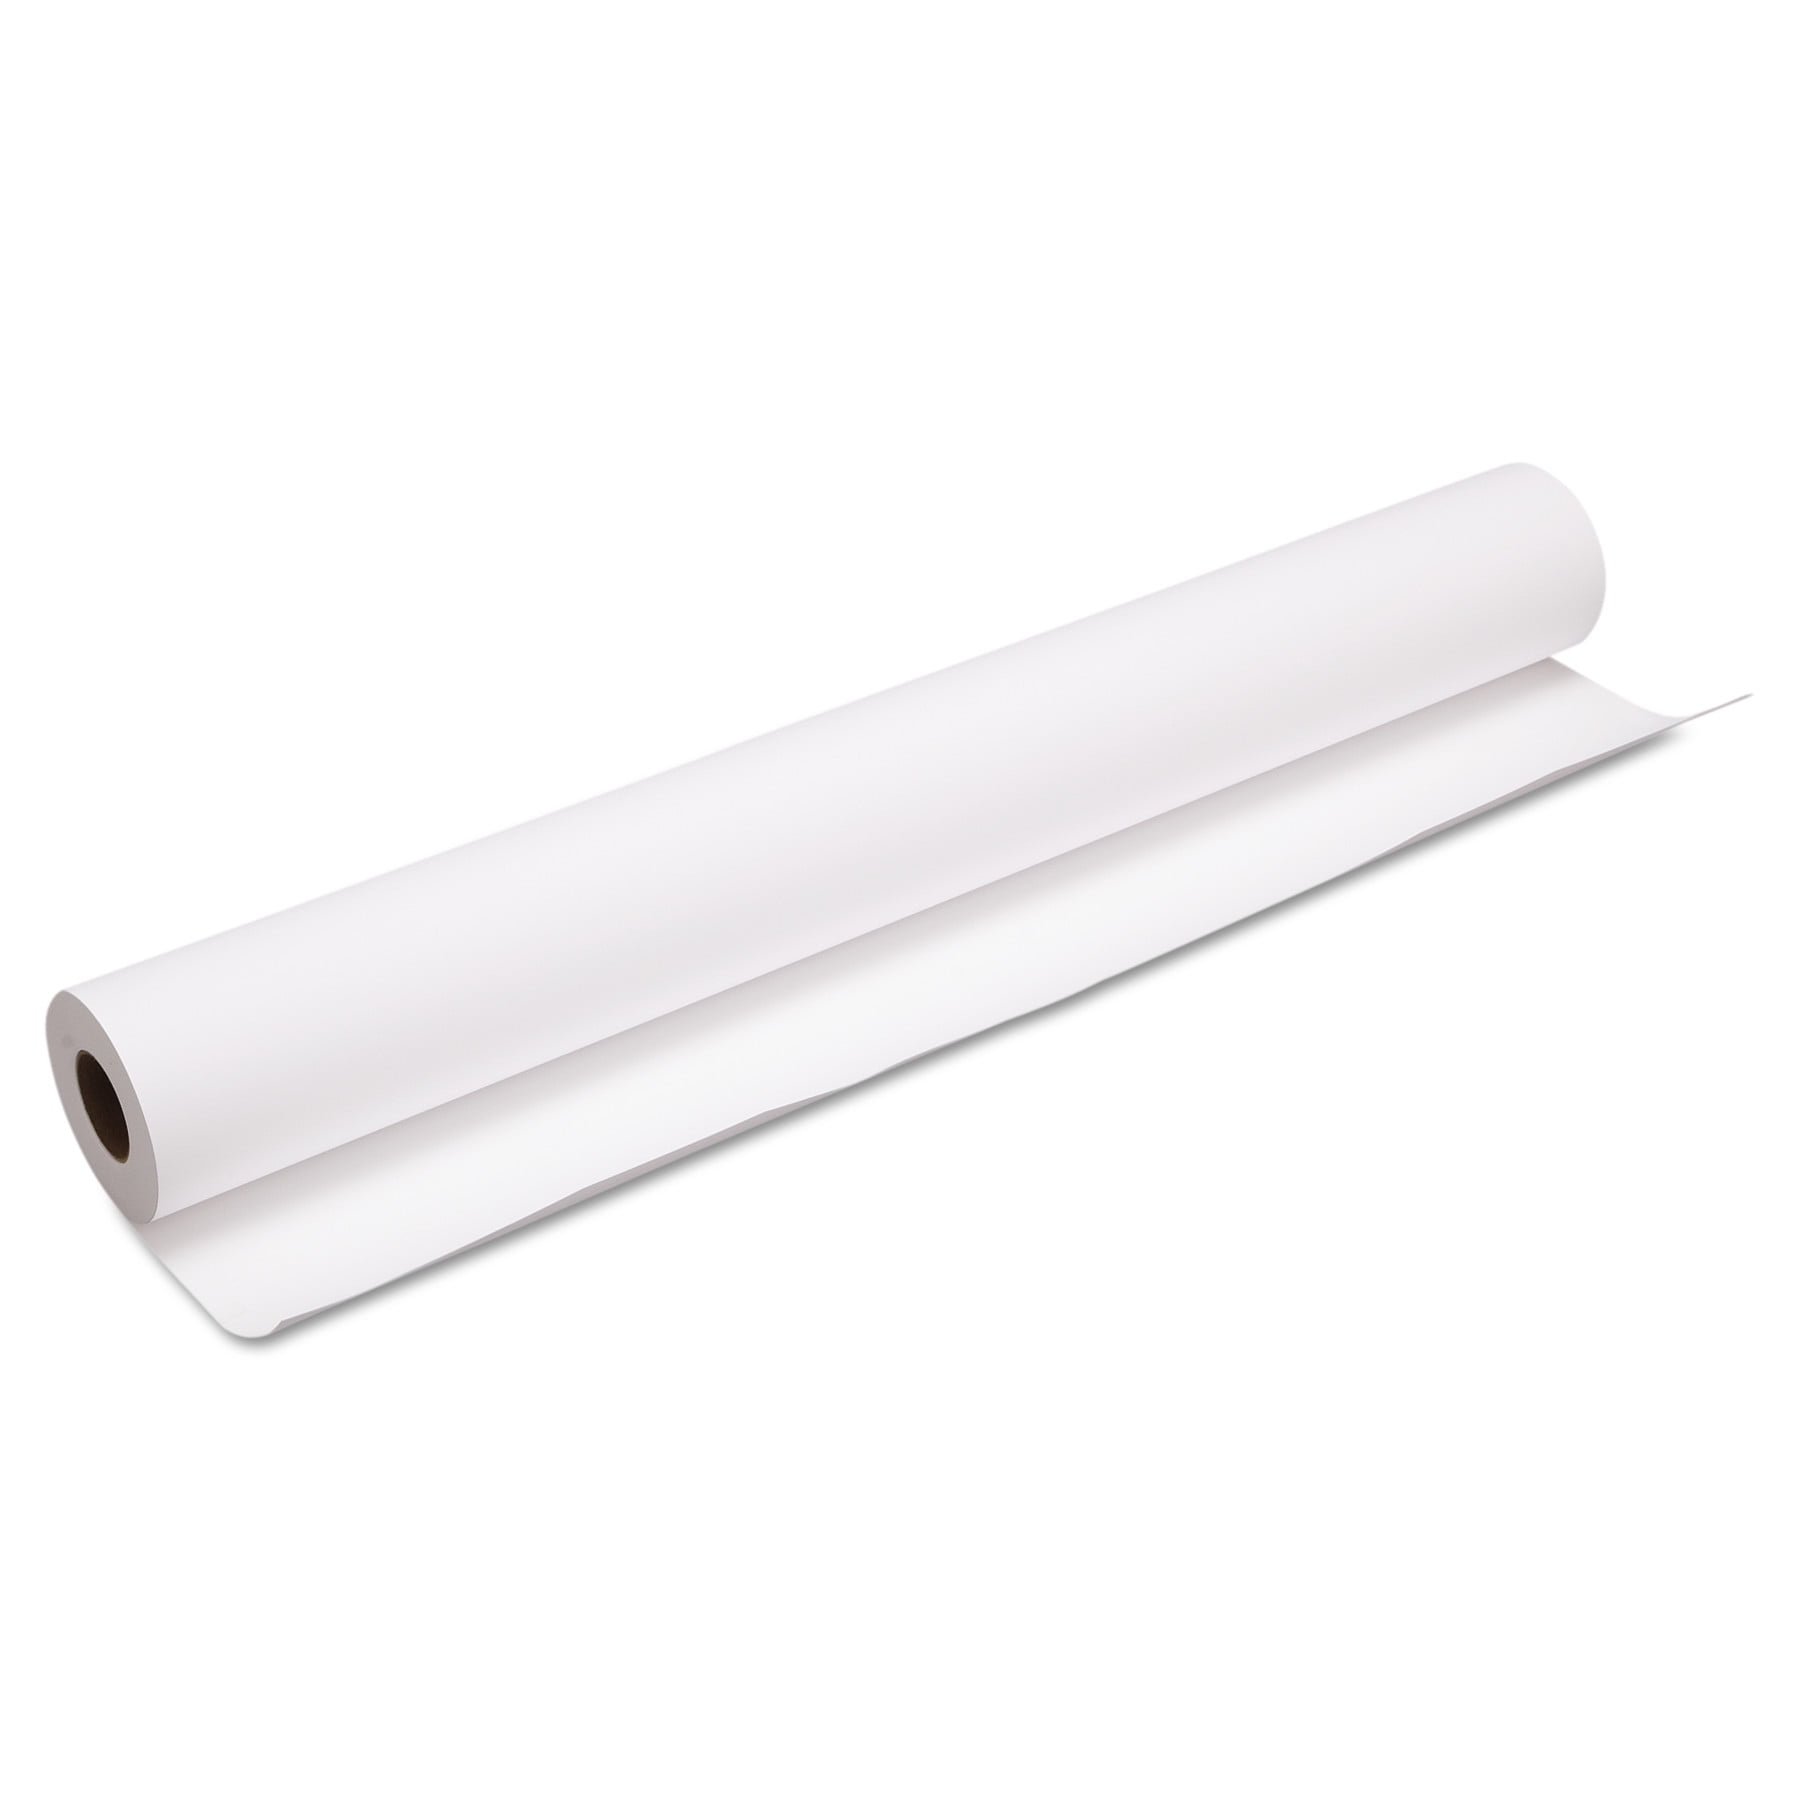 46 lb heavyweight coated bond paper roll - Bright White Paper